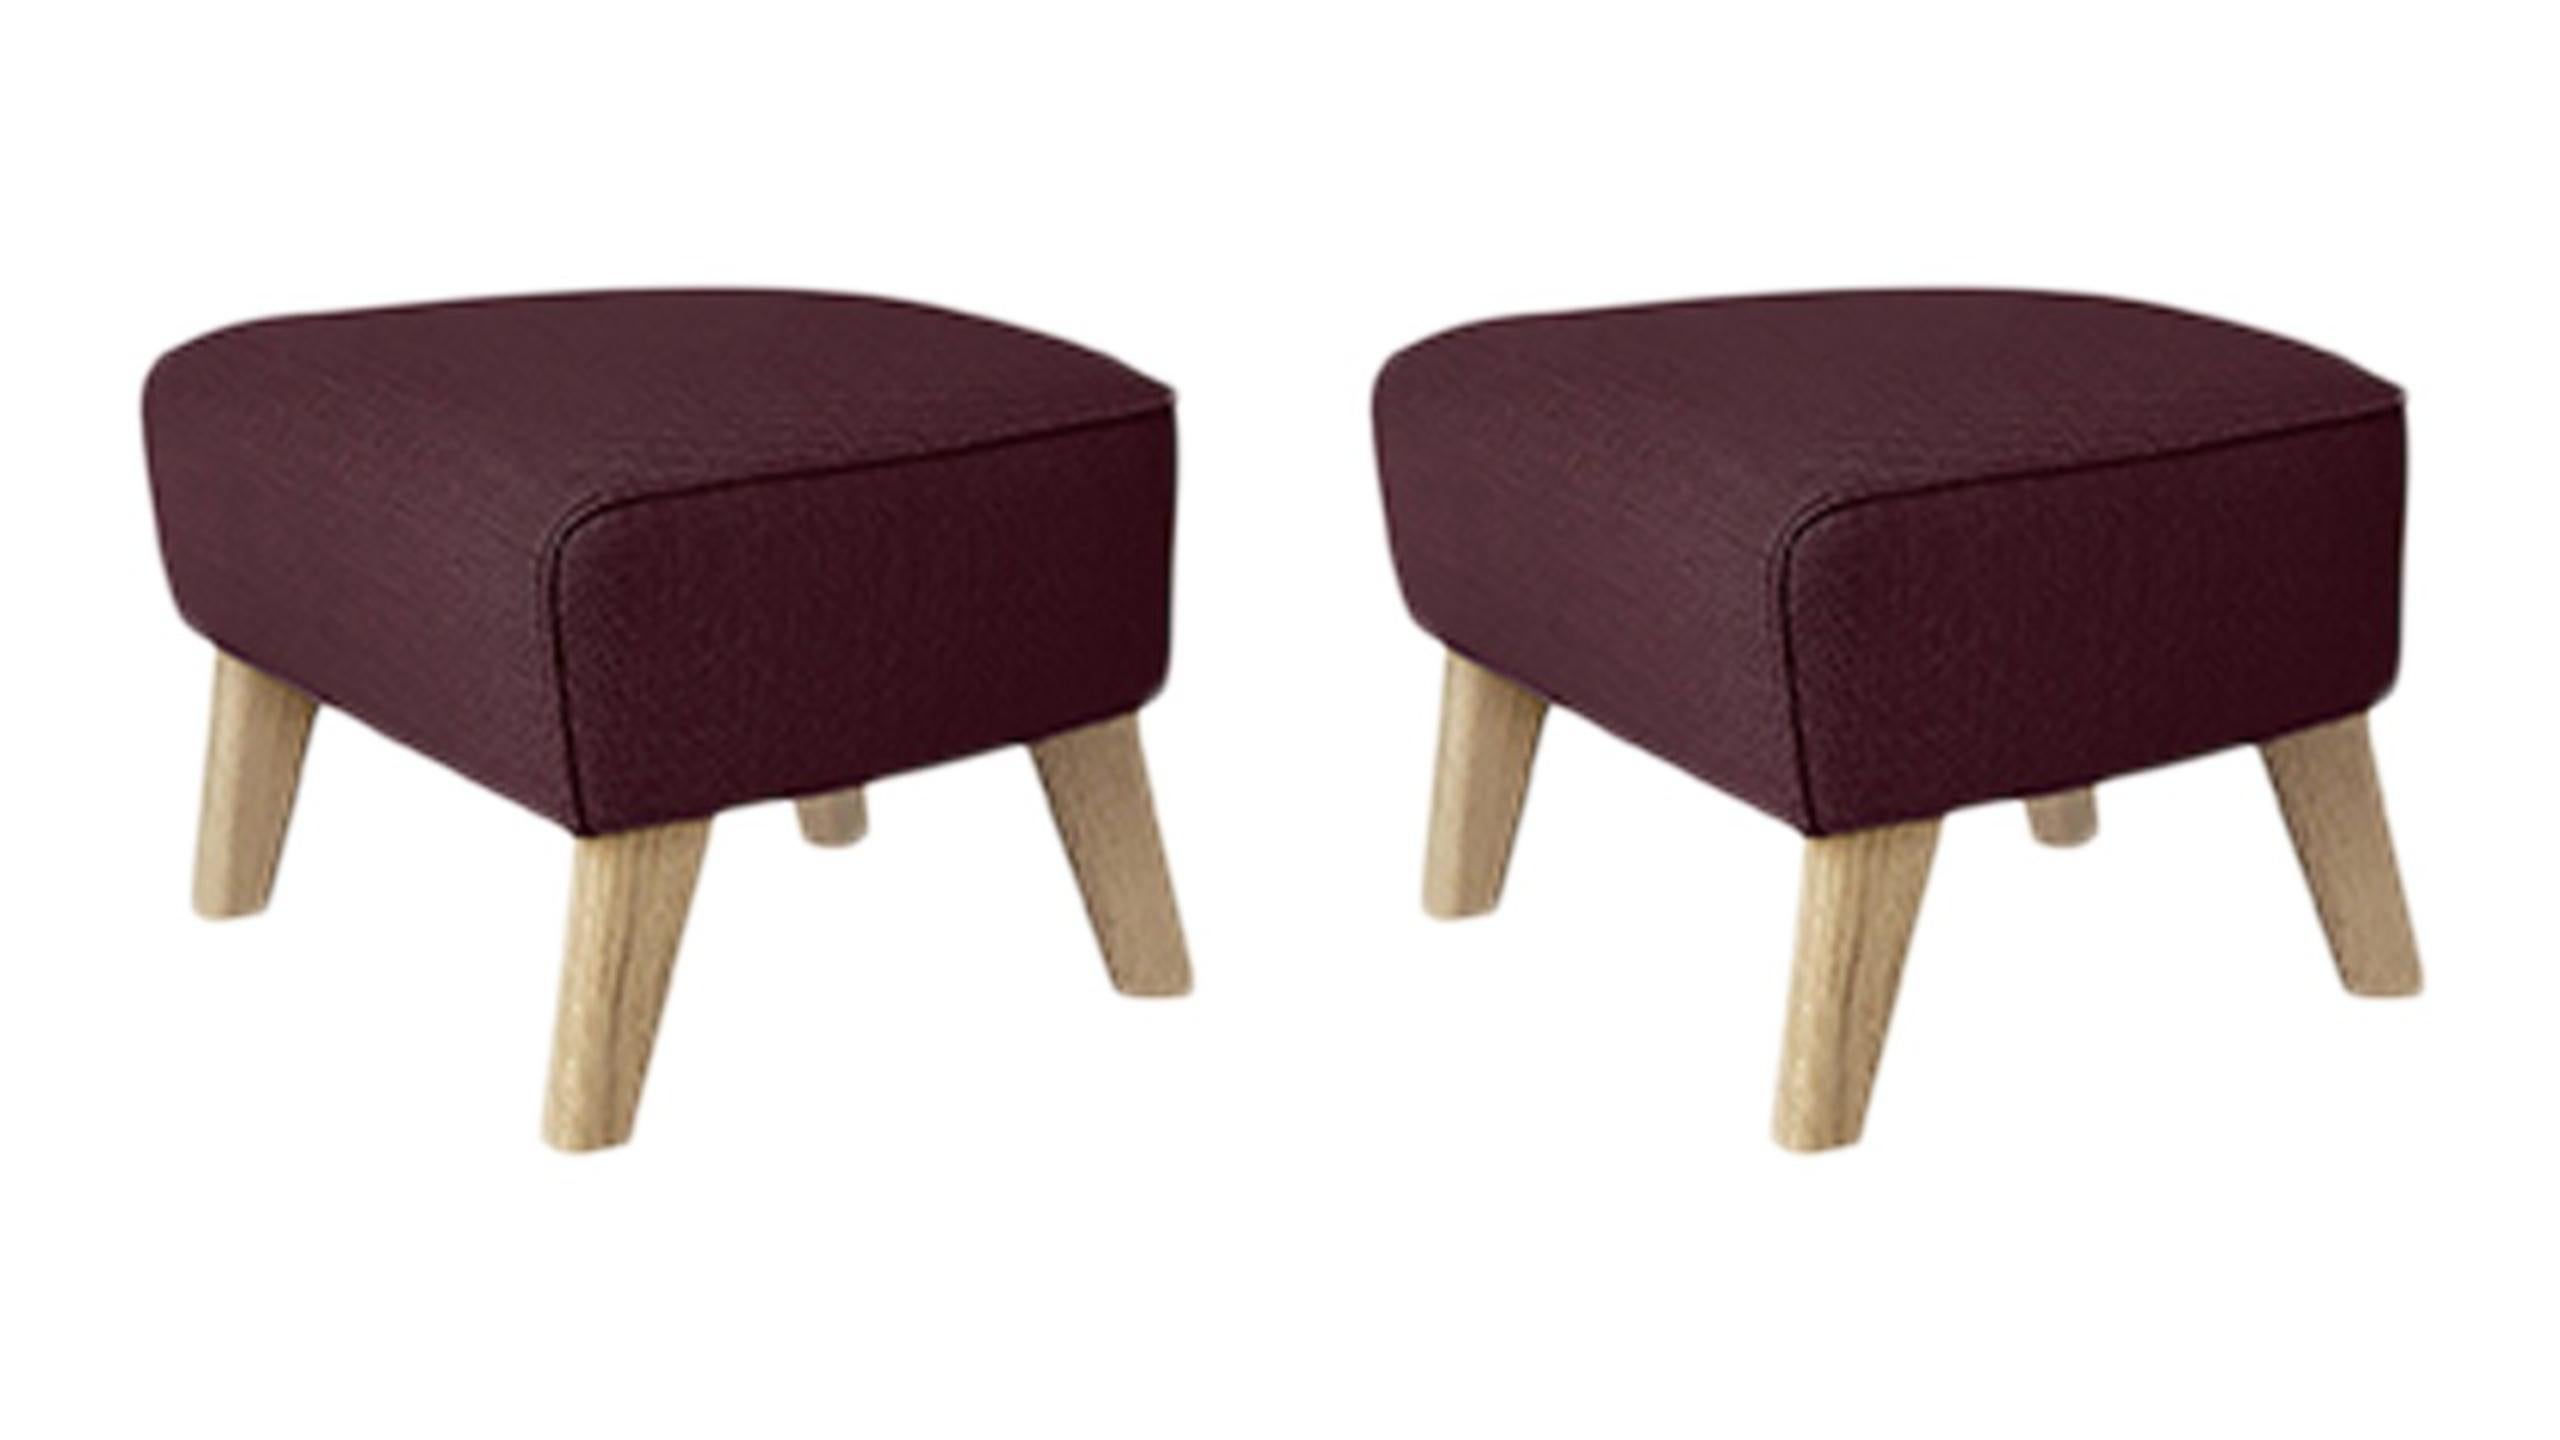 Set of 2 maroon, natural oak Raf Simons Vidar 3 my own chair footstool by Lassen
Dimensions: W 56 x D 58 x H 40 cm 
Materials: Textile
Also available: Other colors available

The my own chair footstool has been designed in the same spirit as